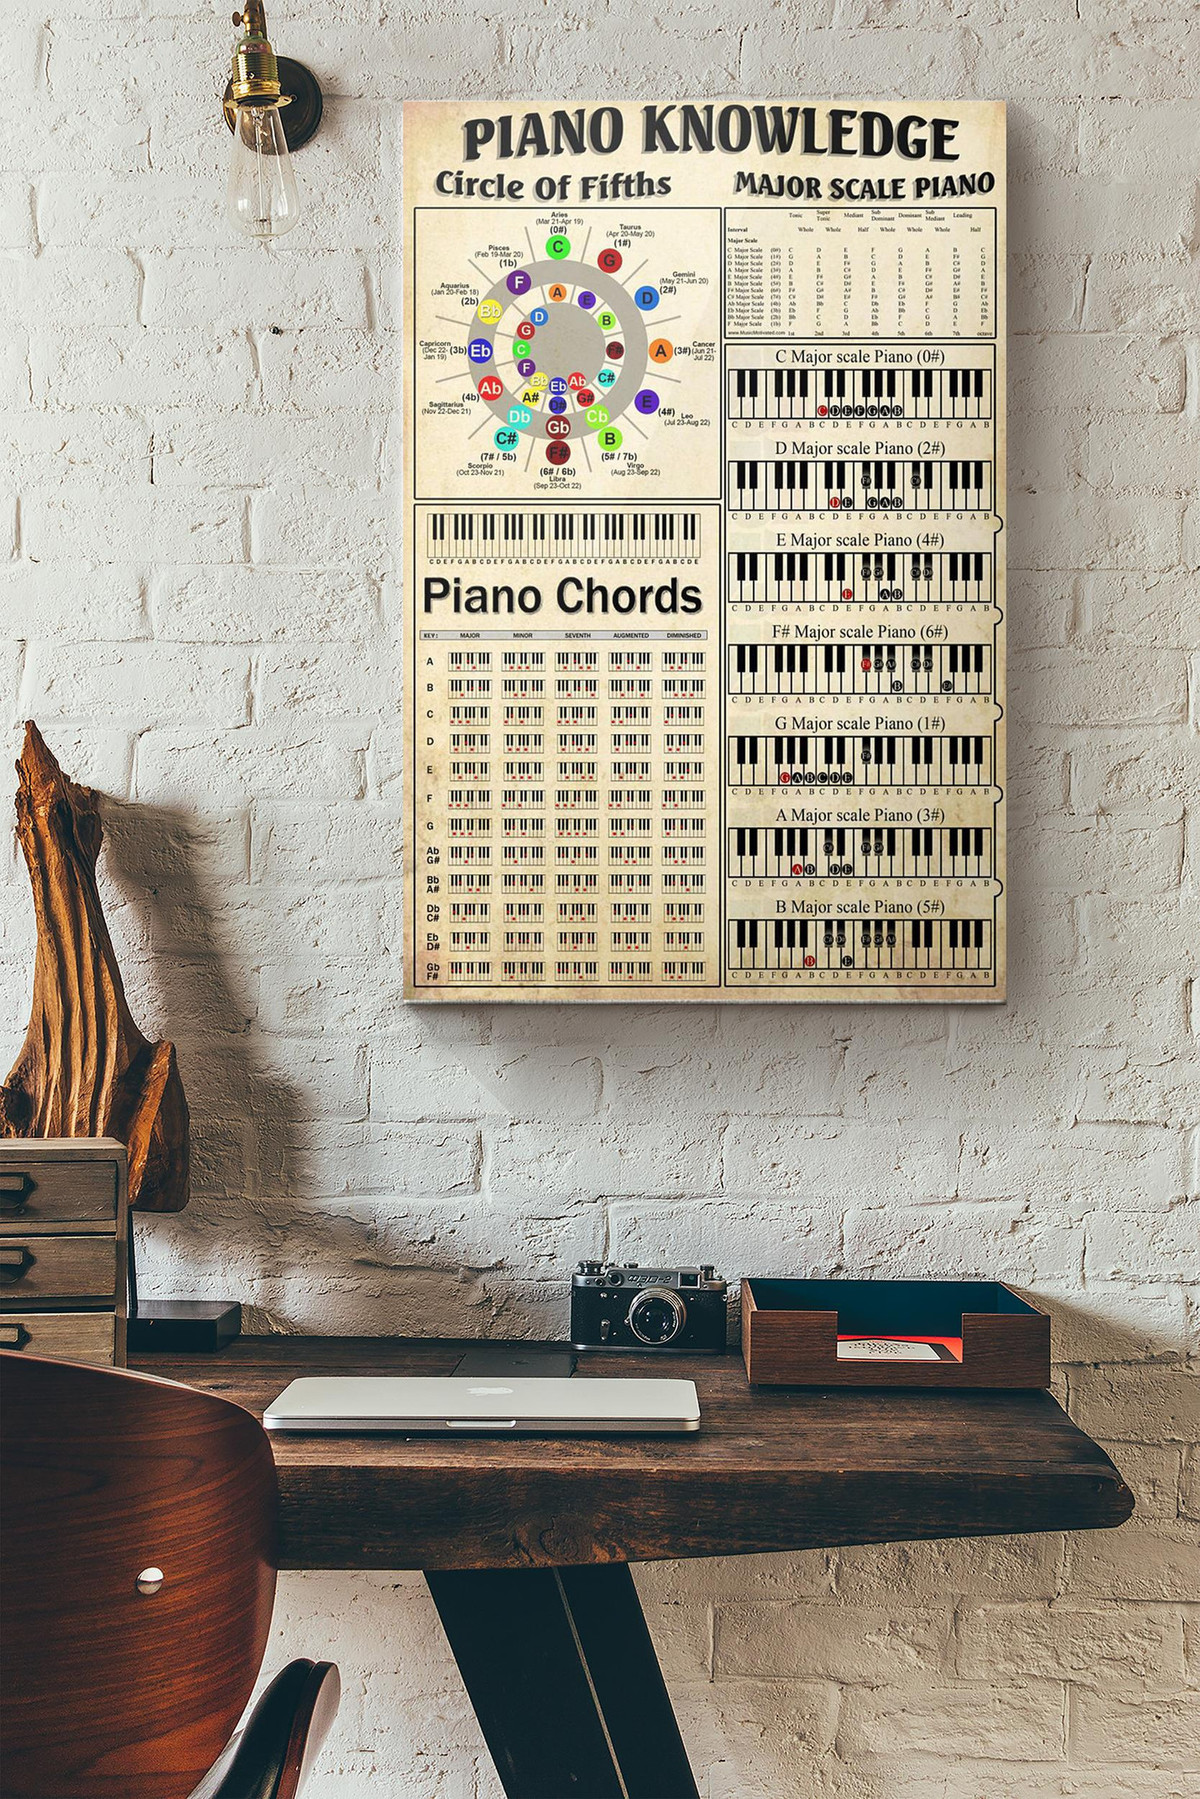 Piano Knowledge Circle Of Fifths Piano Chords Major Scale Piano Canvas Painting Ideas, Canvas Hanging Prints, Gift Idea Framed Prints, Canvas Paintings Wrapped Canvas 8x10